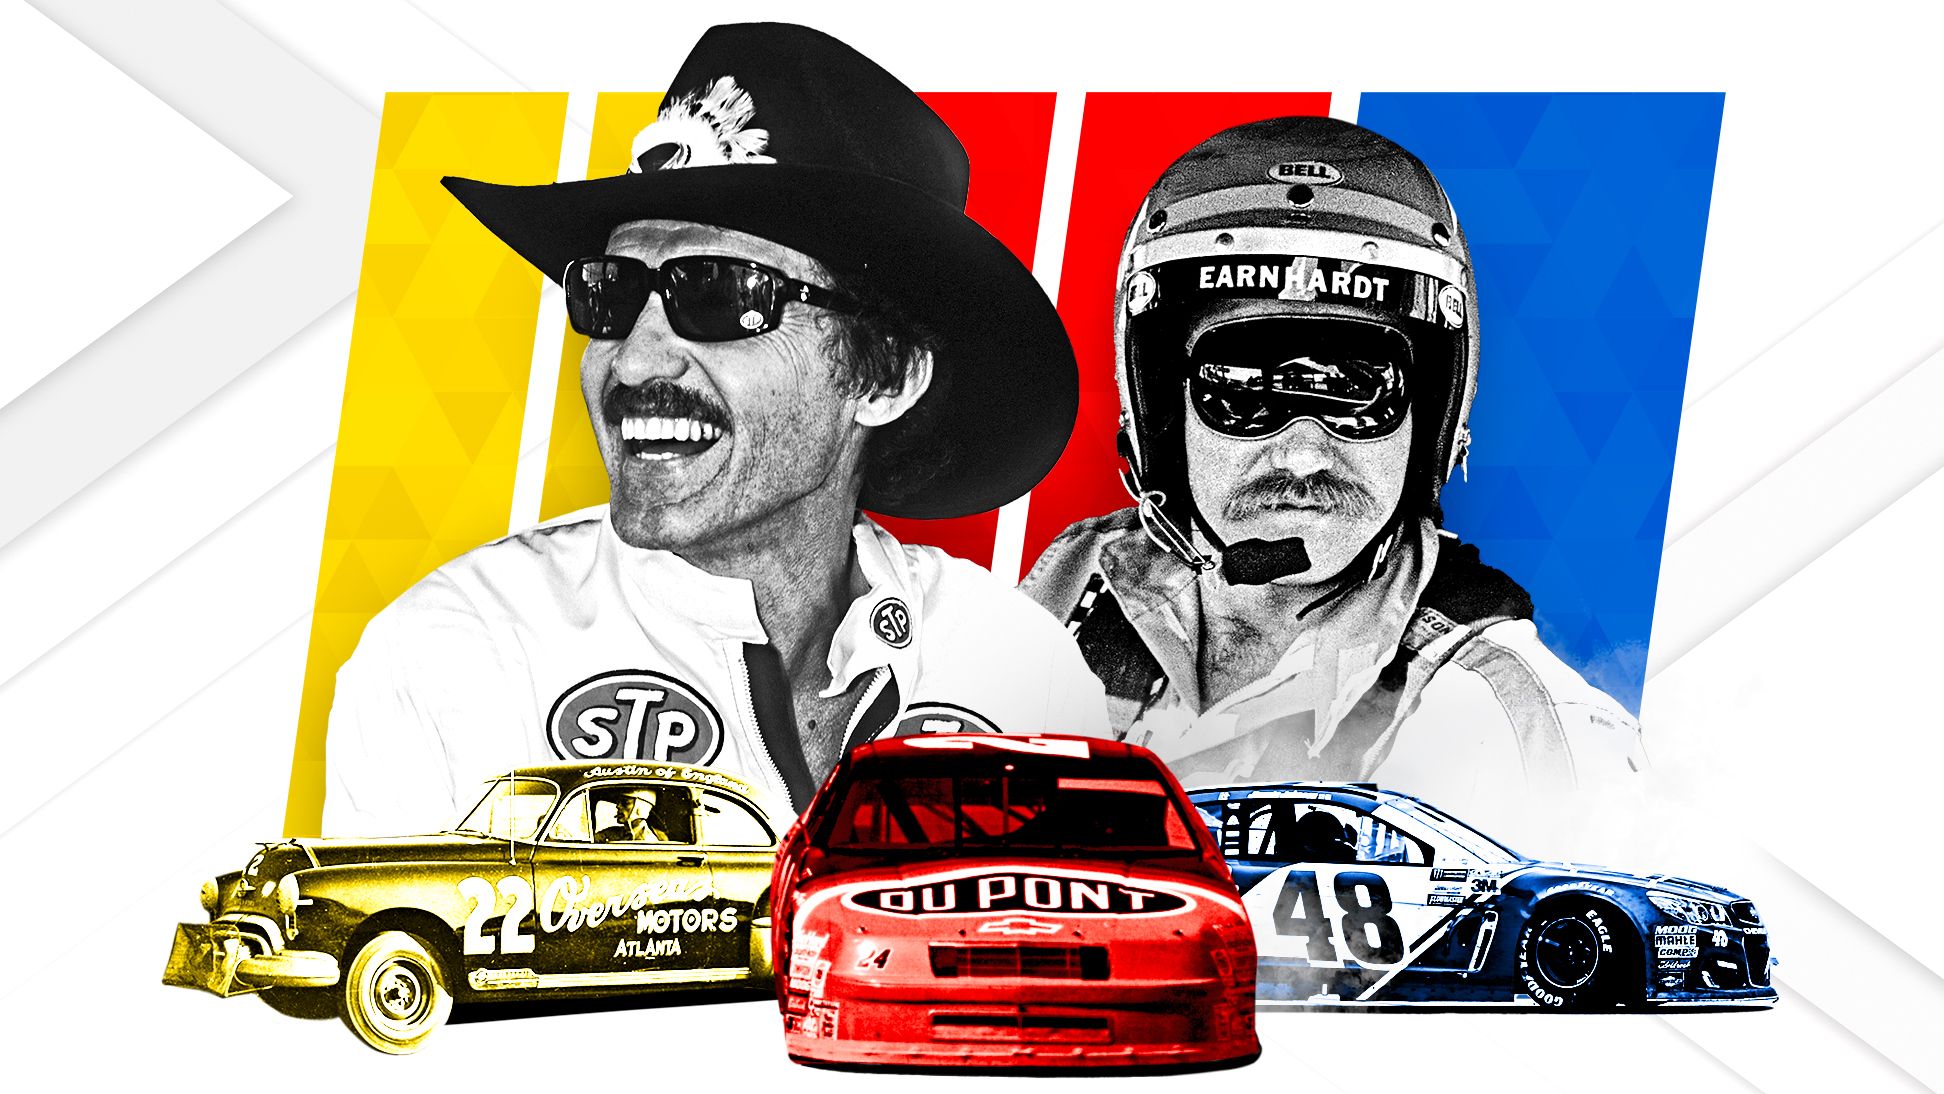 75 things for NASCAR's 75th anniversary: Greatest races